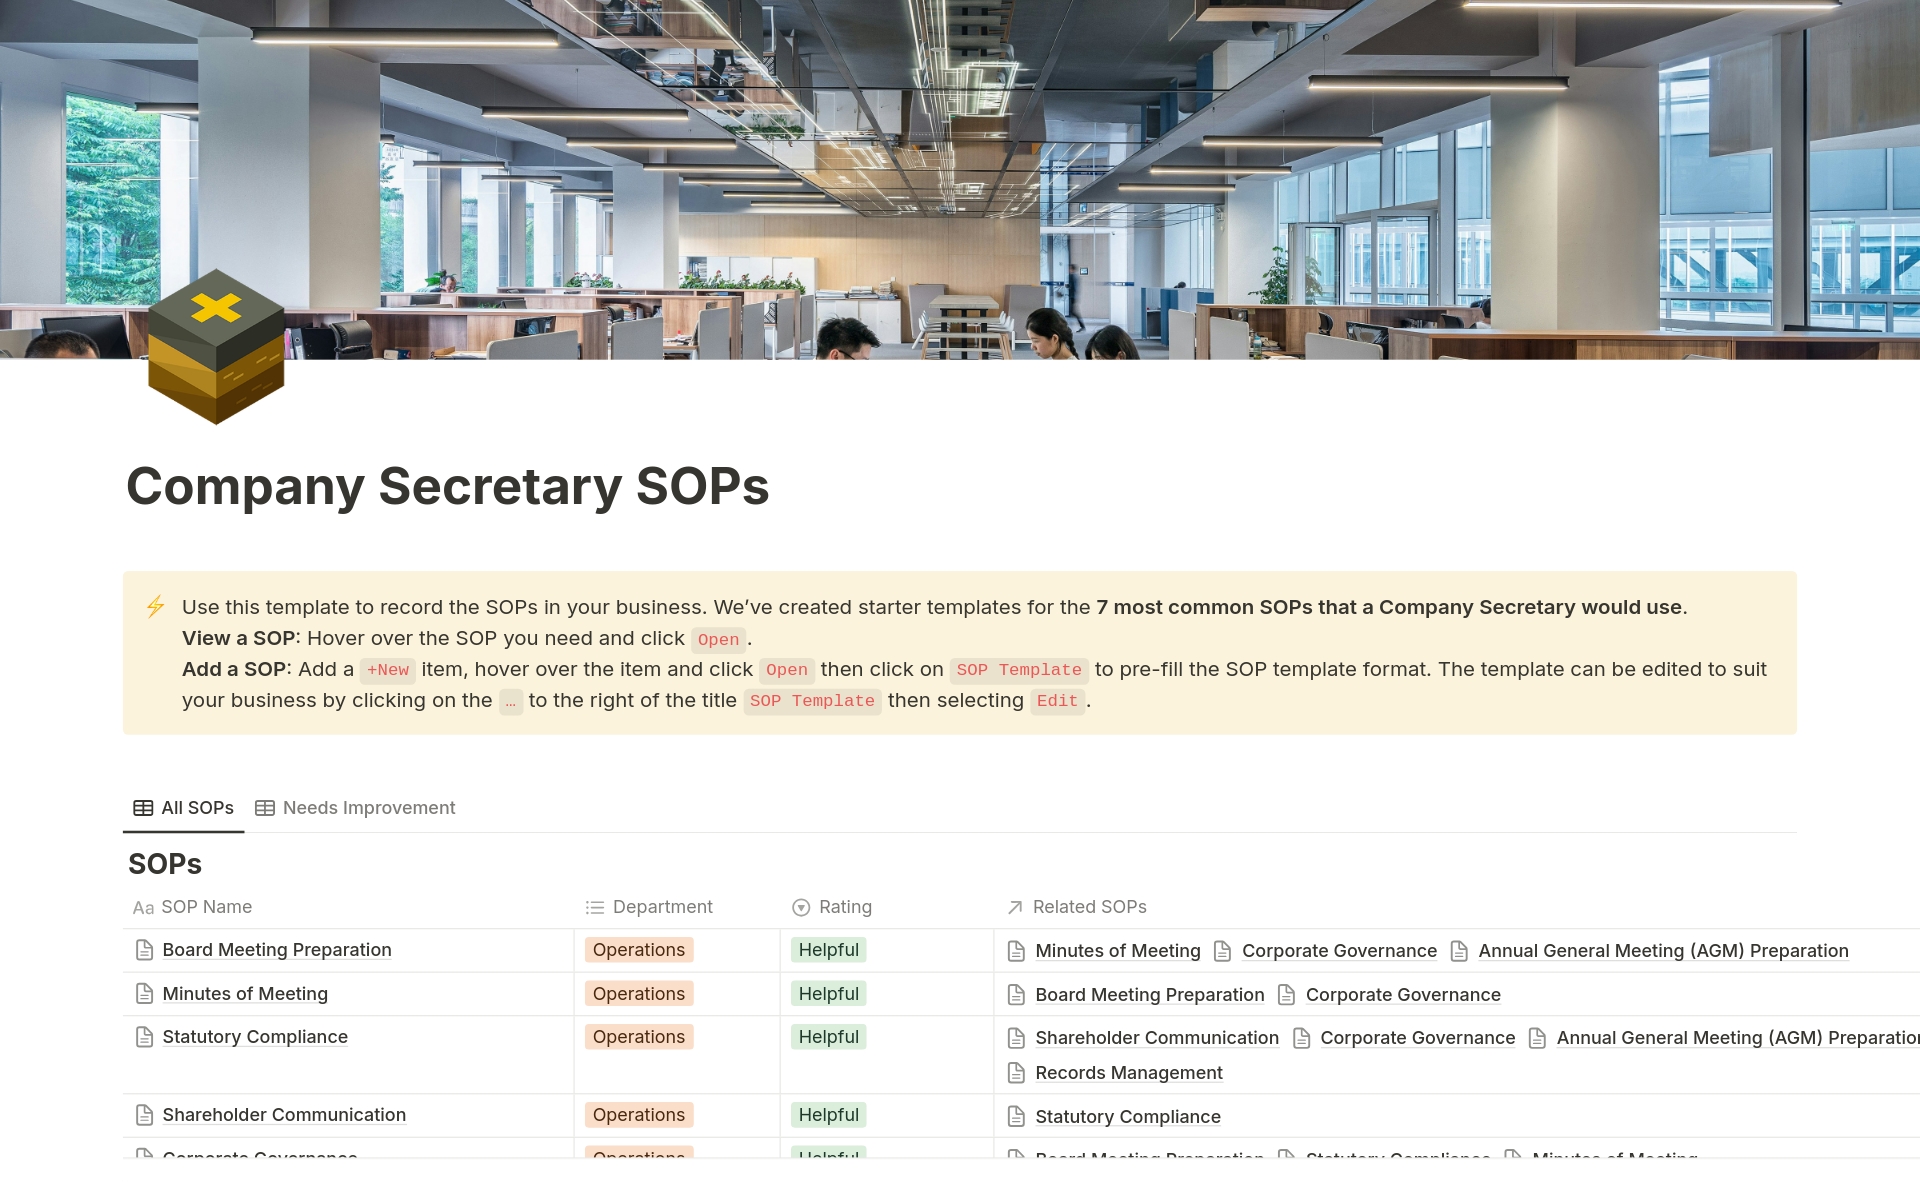 This template describes the standard operating procedures (SOPs) for a company secretary. Includes 20+ pages of best practice SOPs to save you 10+ hours of research.